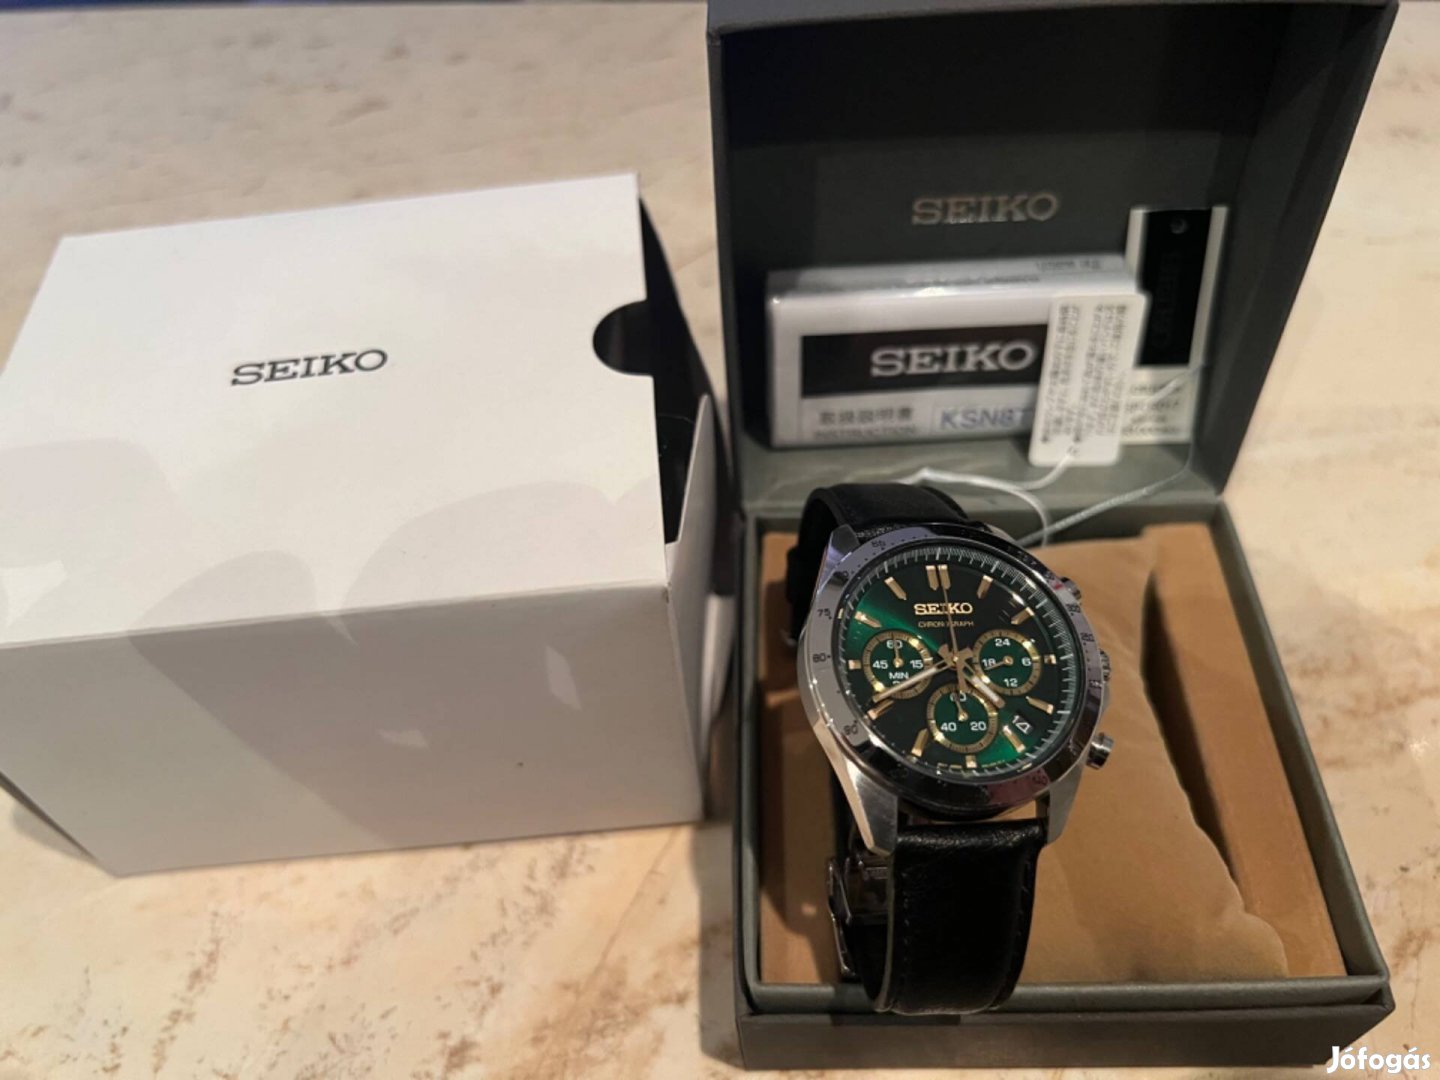 Seiko Japan limited edition (green dial)